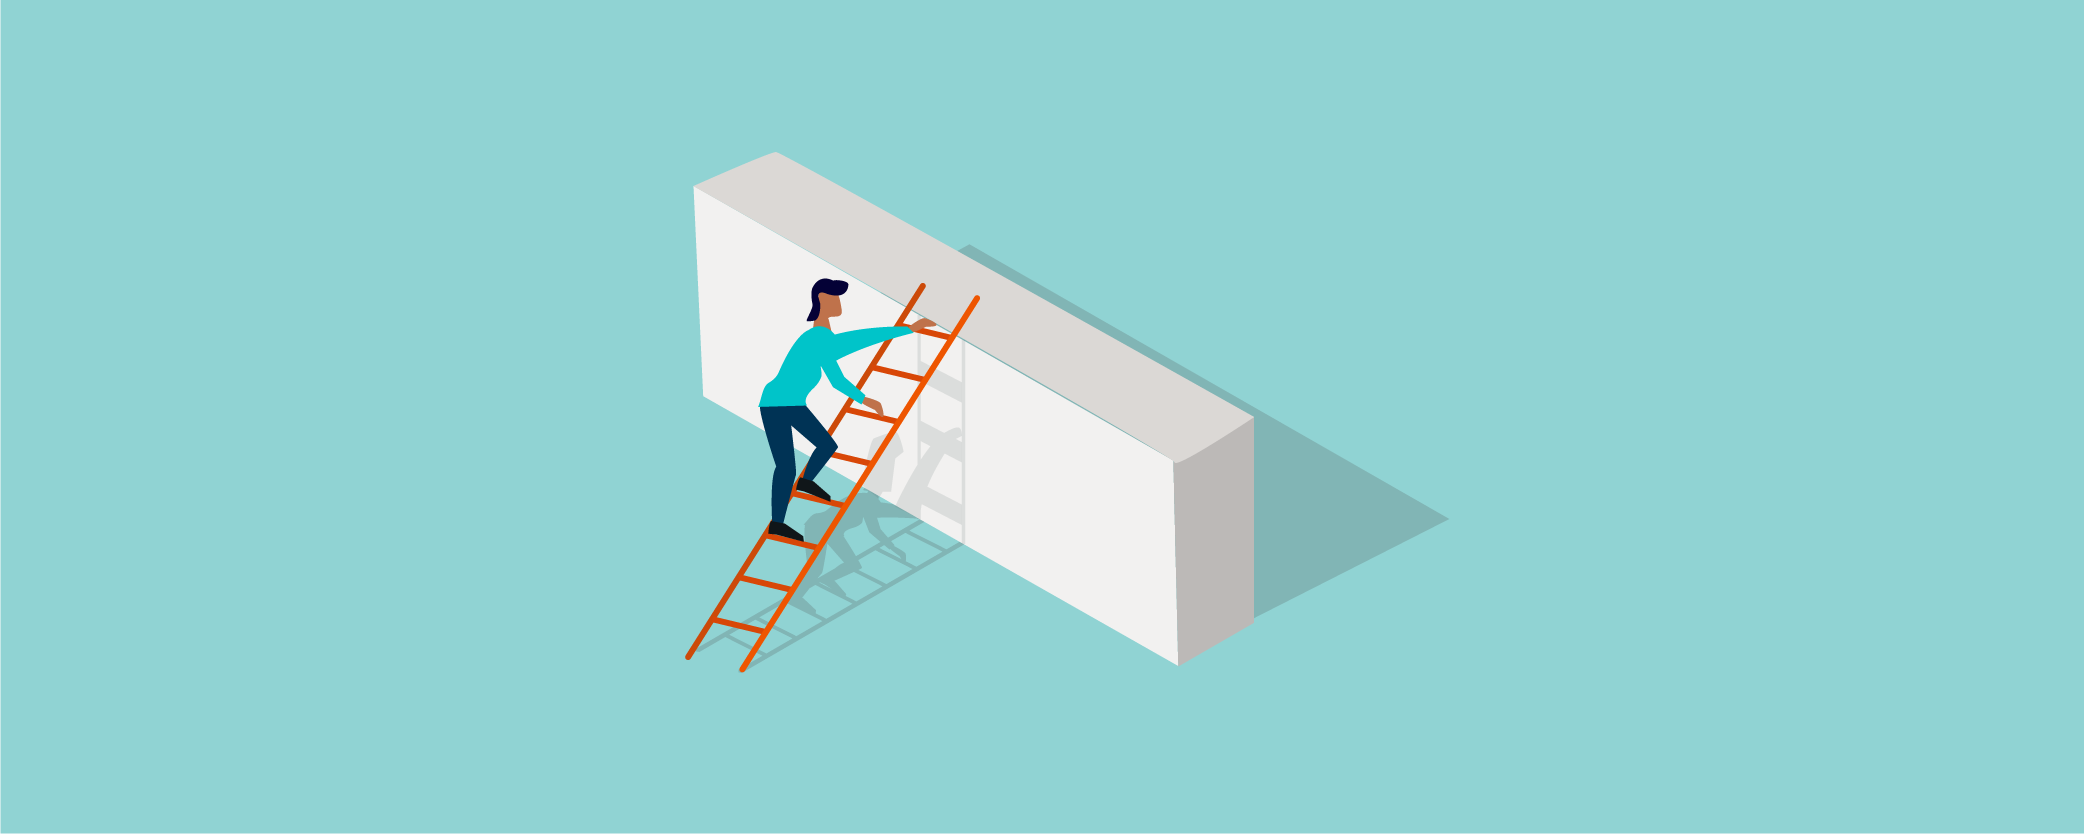 person climbing ladder over wall